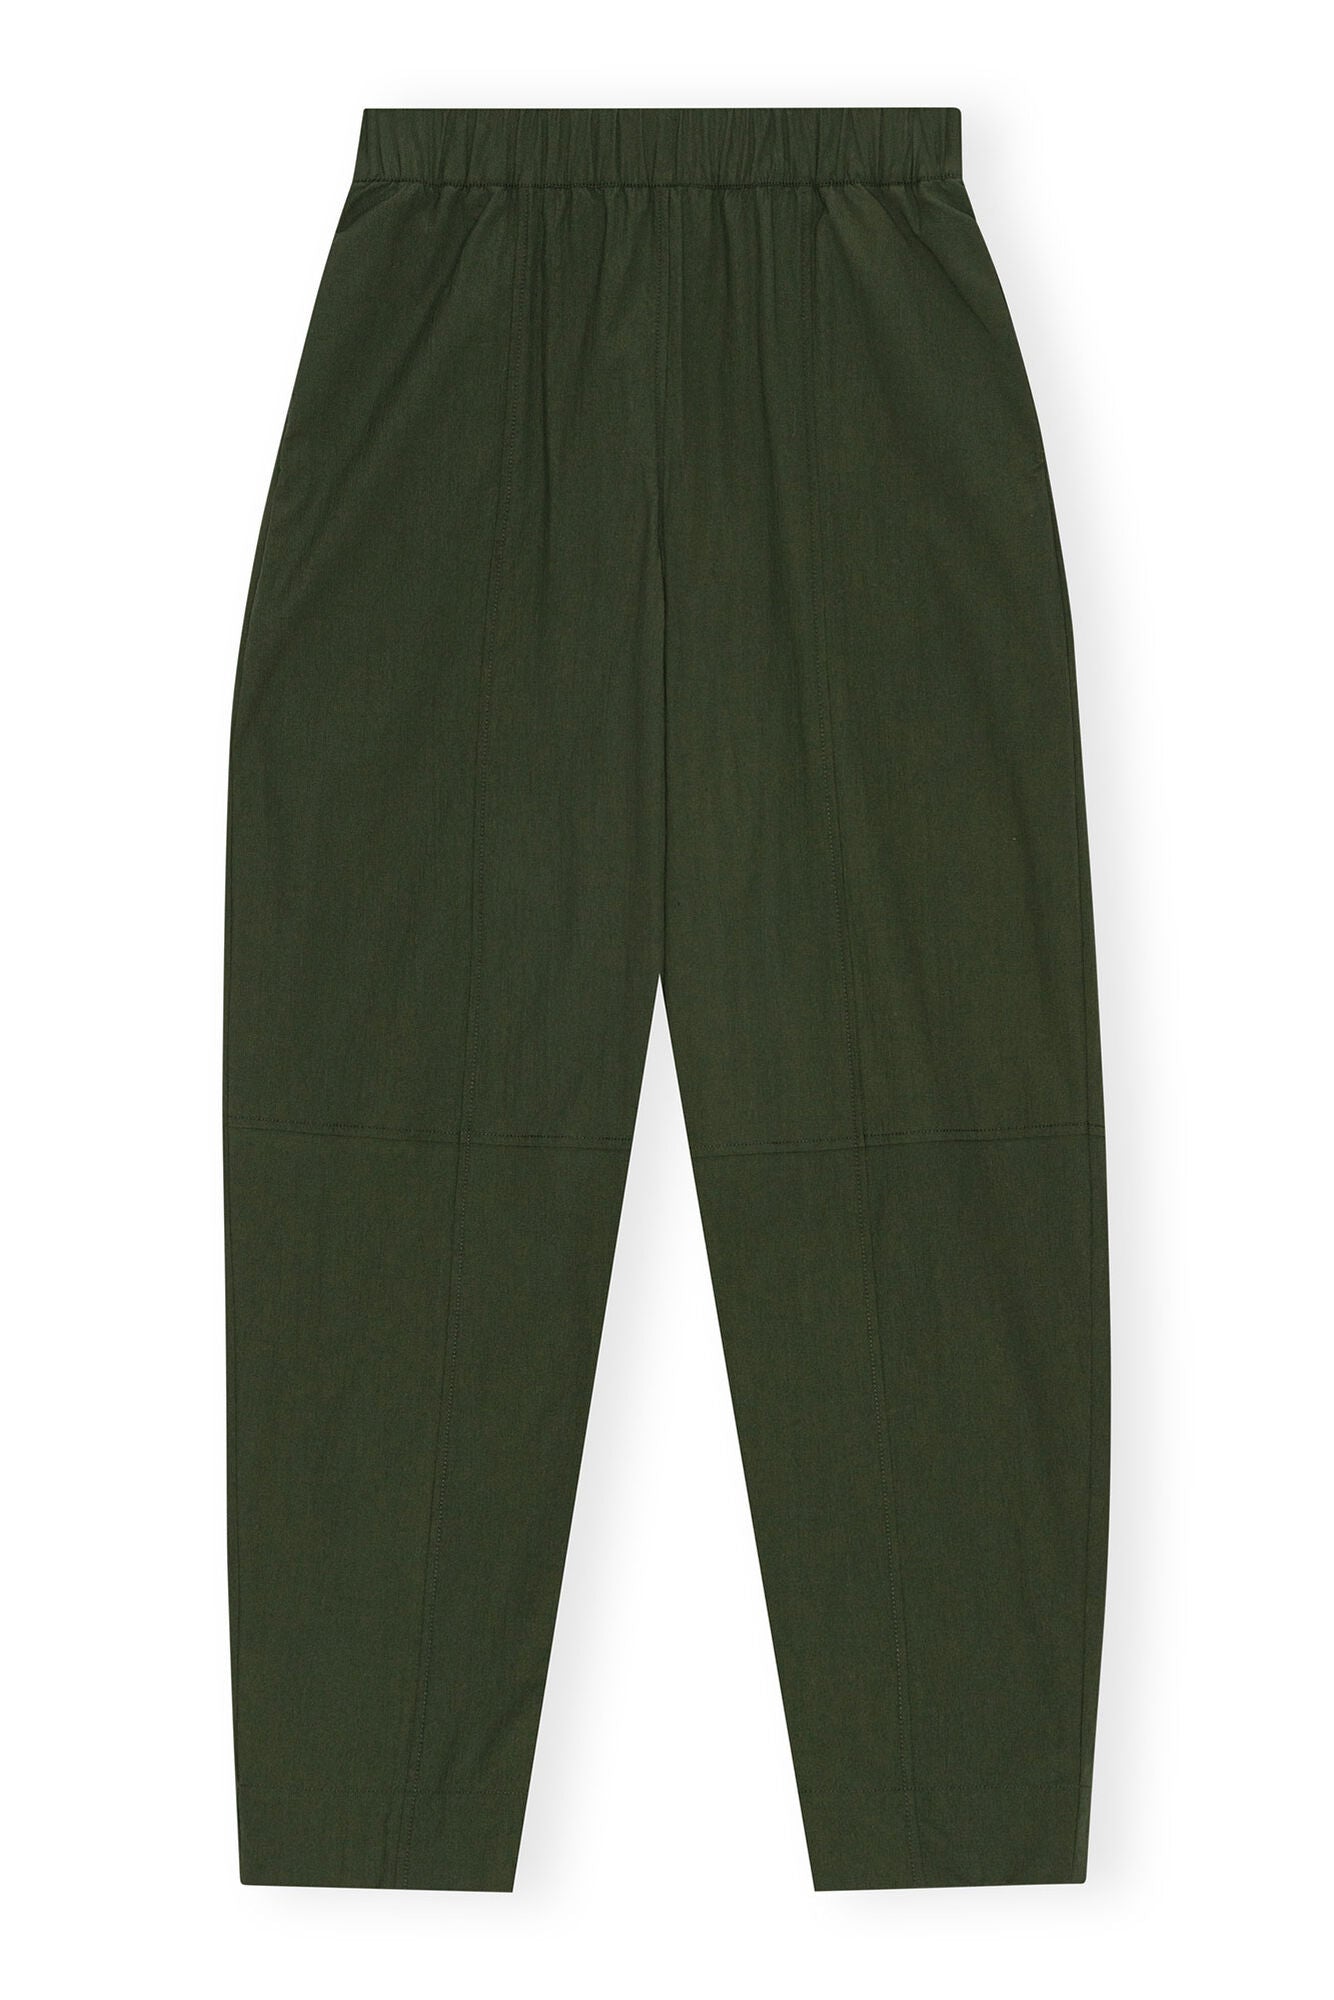 Ganni modern high-waisted trousers green cotton crepe curved-leg | Pipe and Row